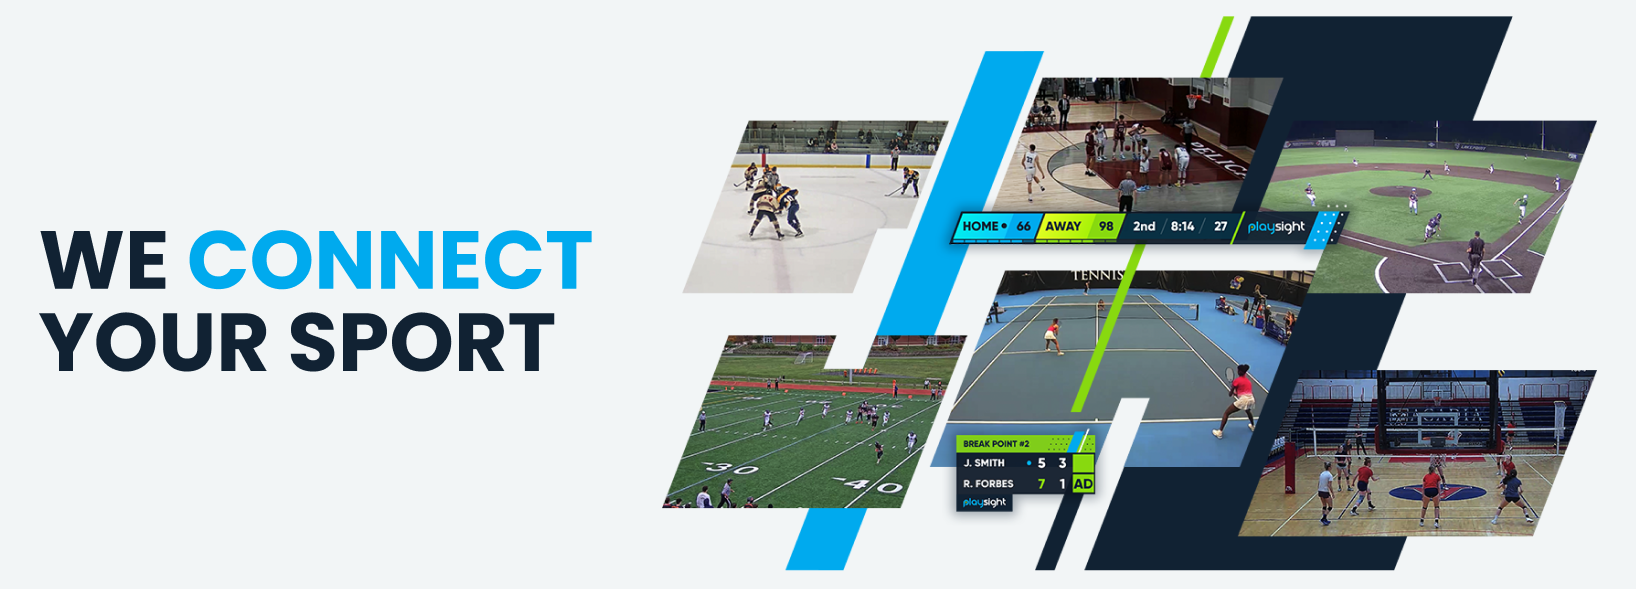 We Connect Your Sports Https://Playsight.com